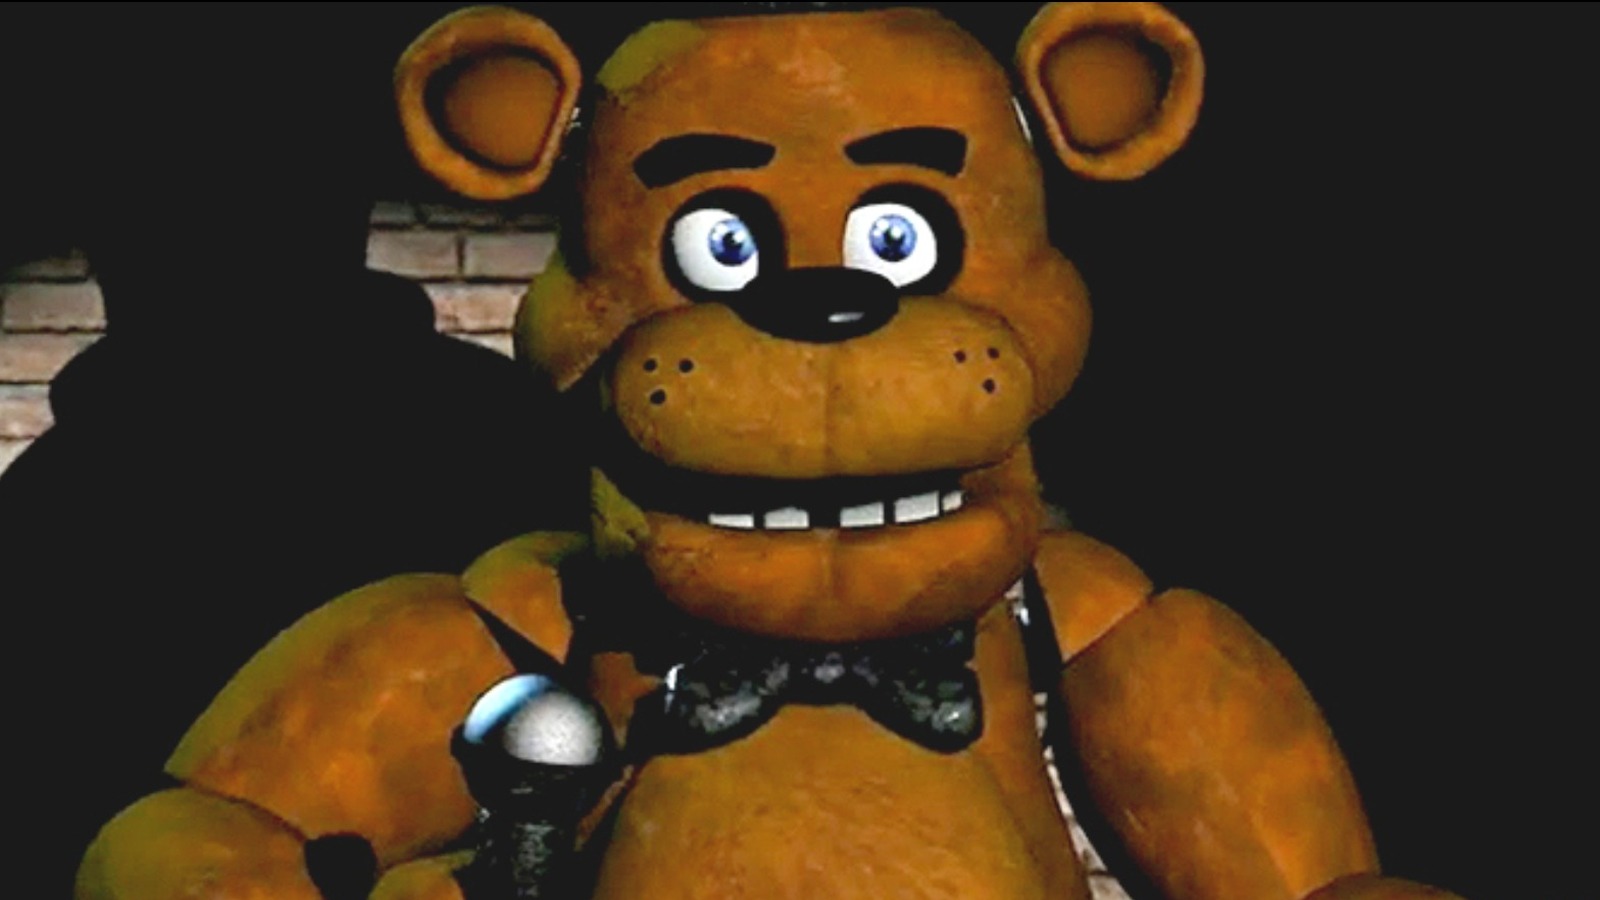 https://www.looper.com/img/gallery/how-youtube-five-nights-at-freddys-changed-modern-horror/l-intro-1686798999.jpg